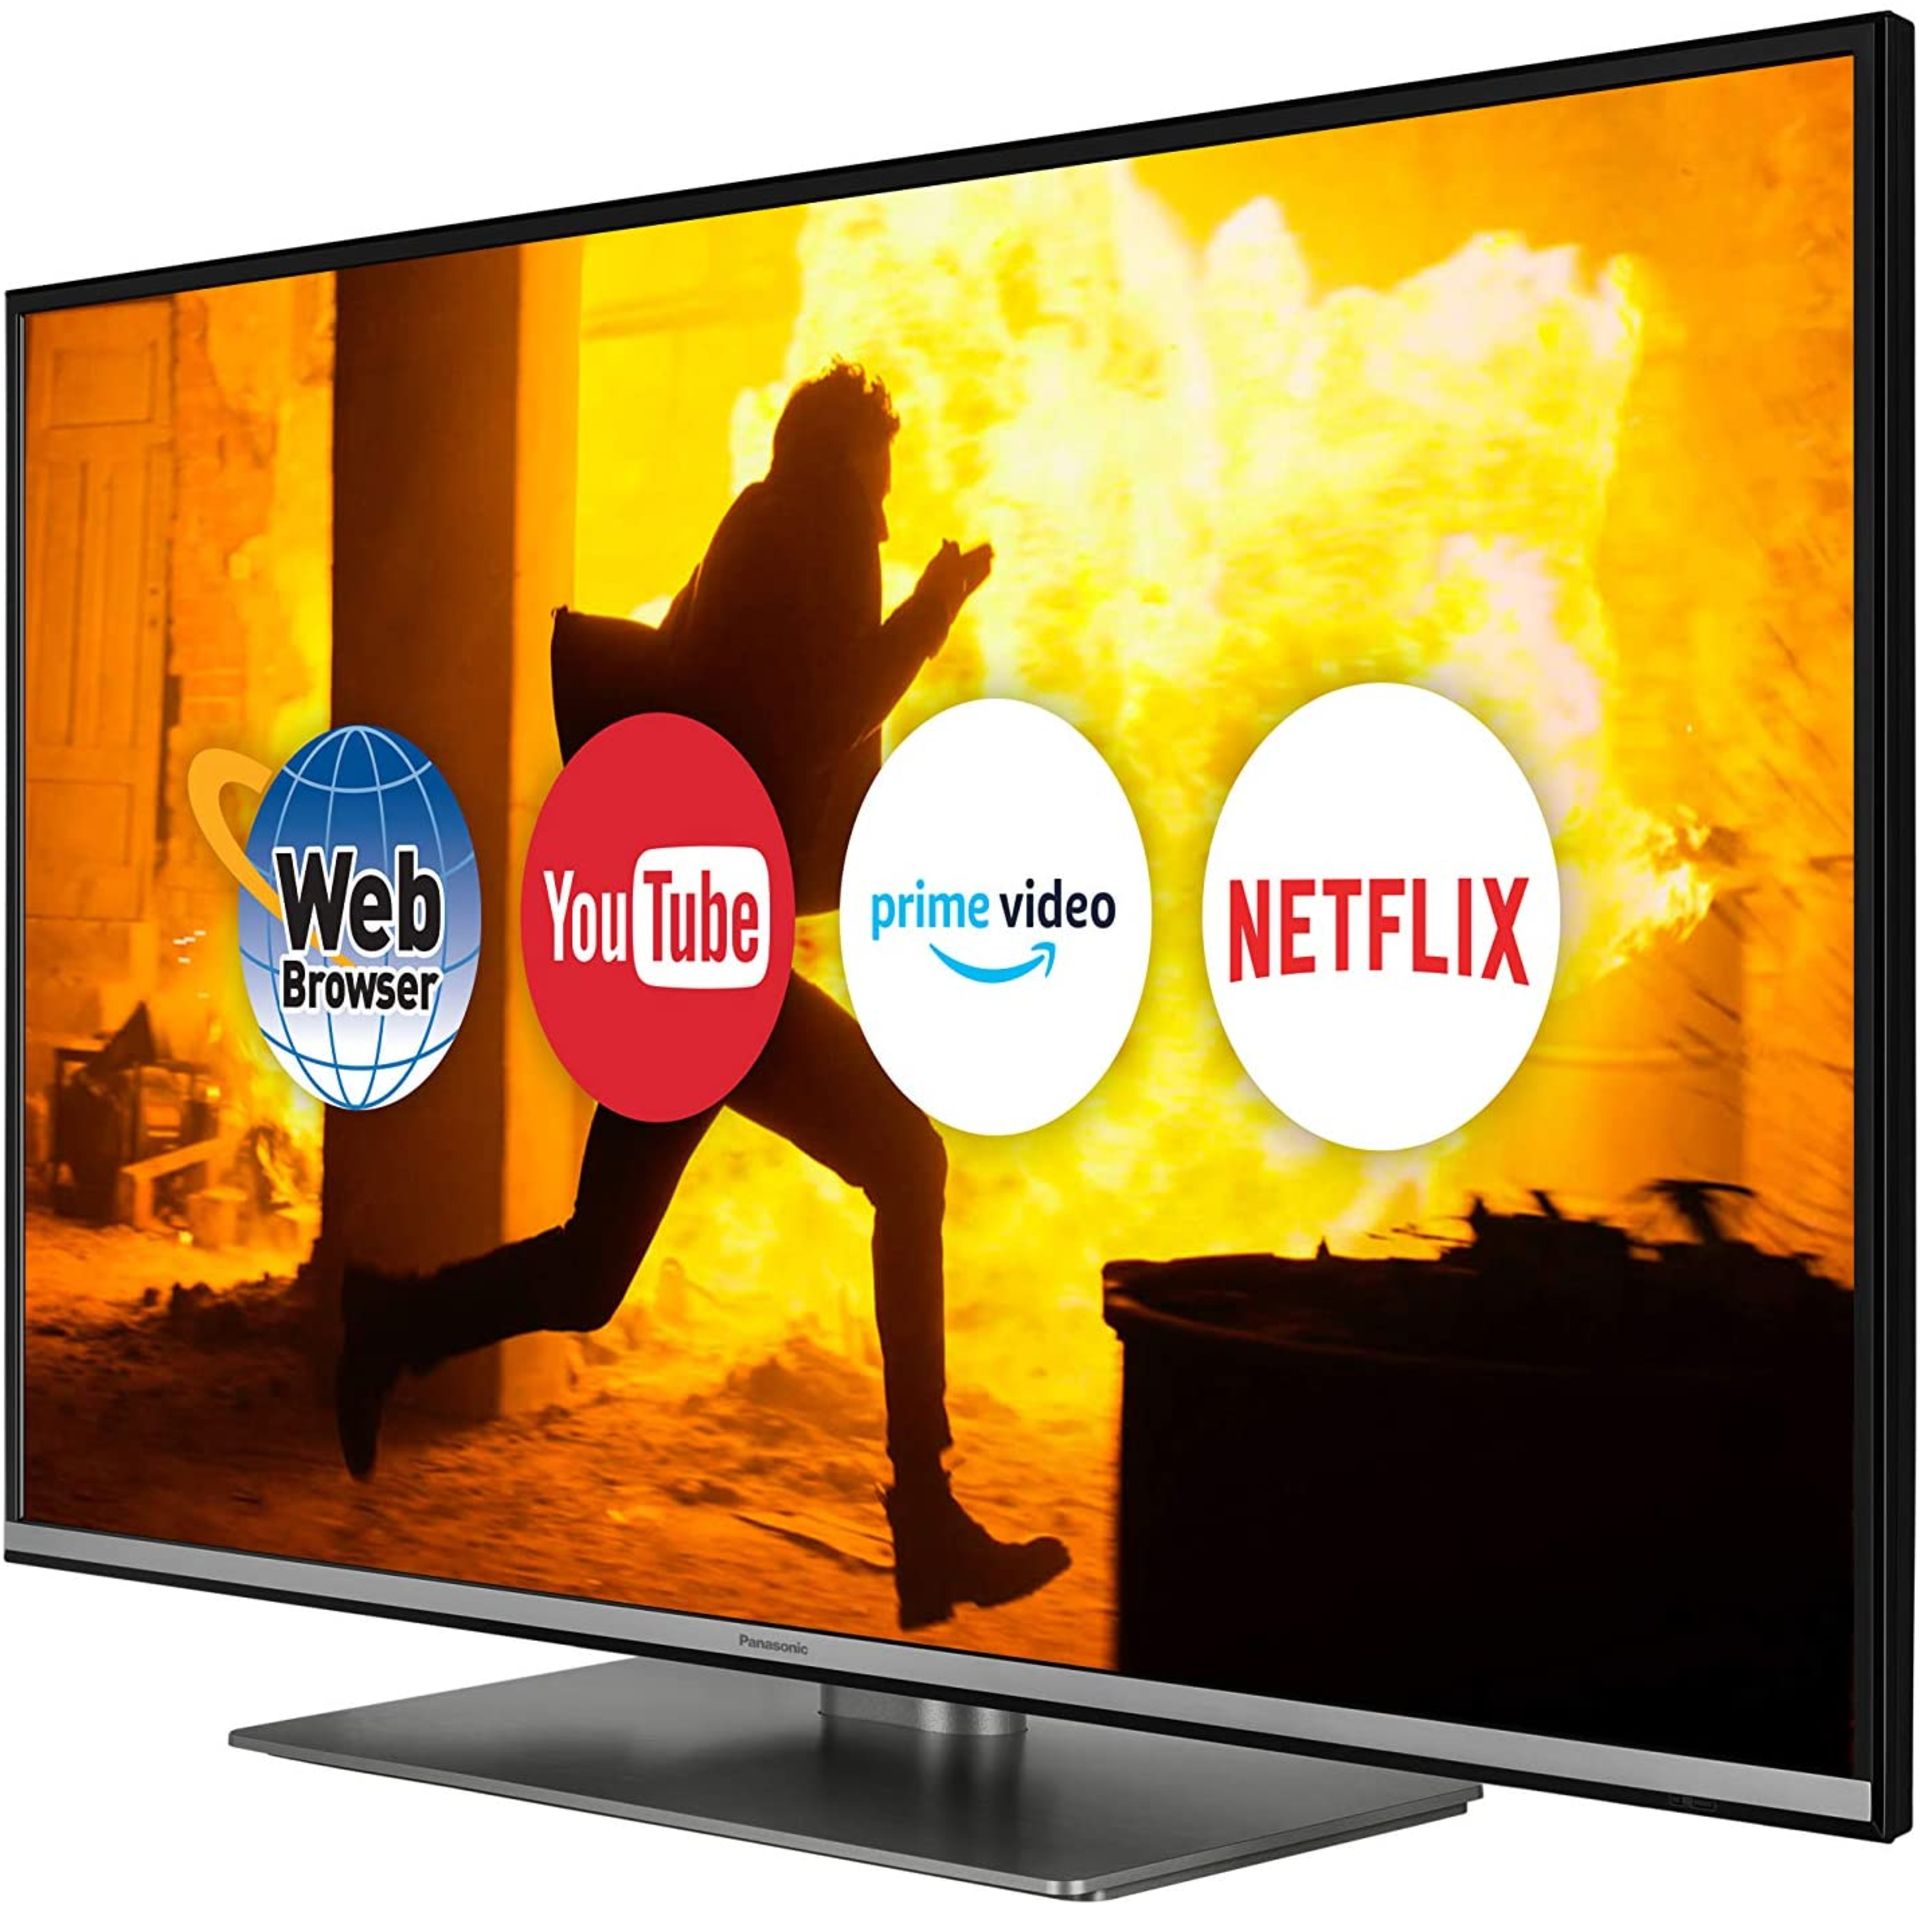 1 PANASONIC TX-32GS352, 32 INCH HD READY SMART LED TV WITH REMOTE AND STAND RRP Â£249 (BLACK